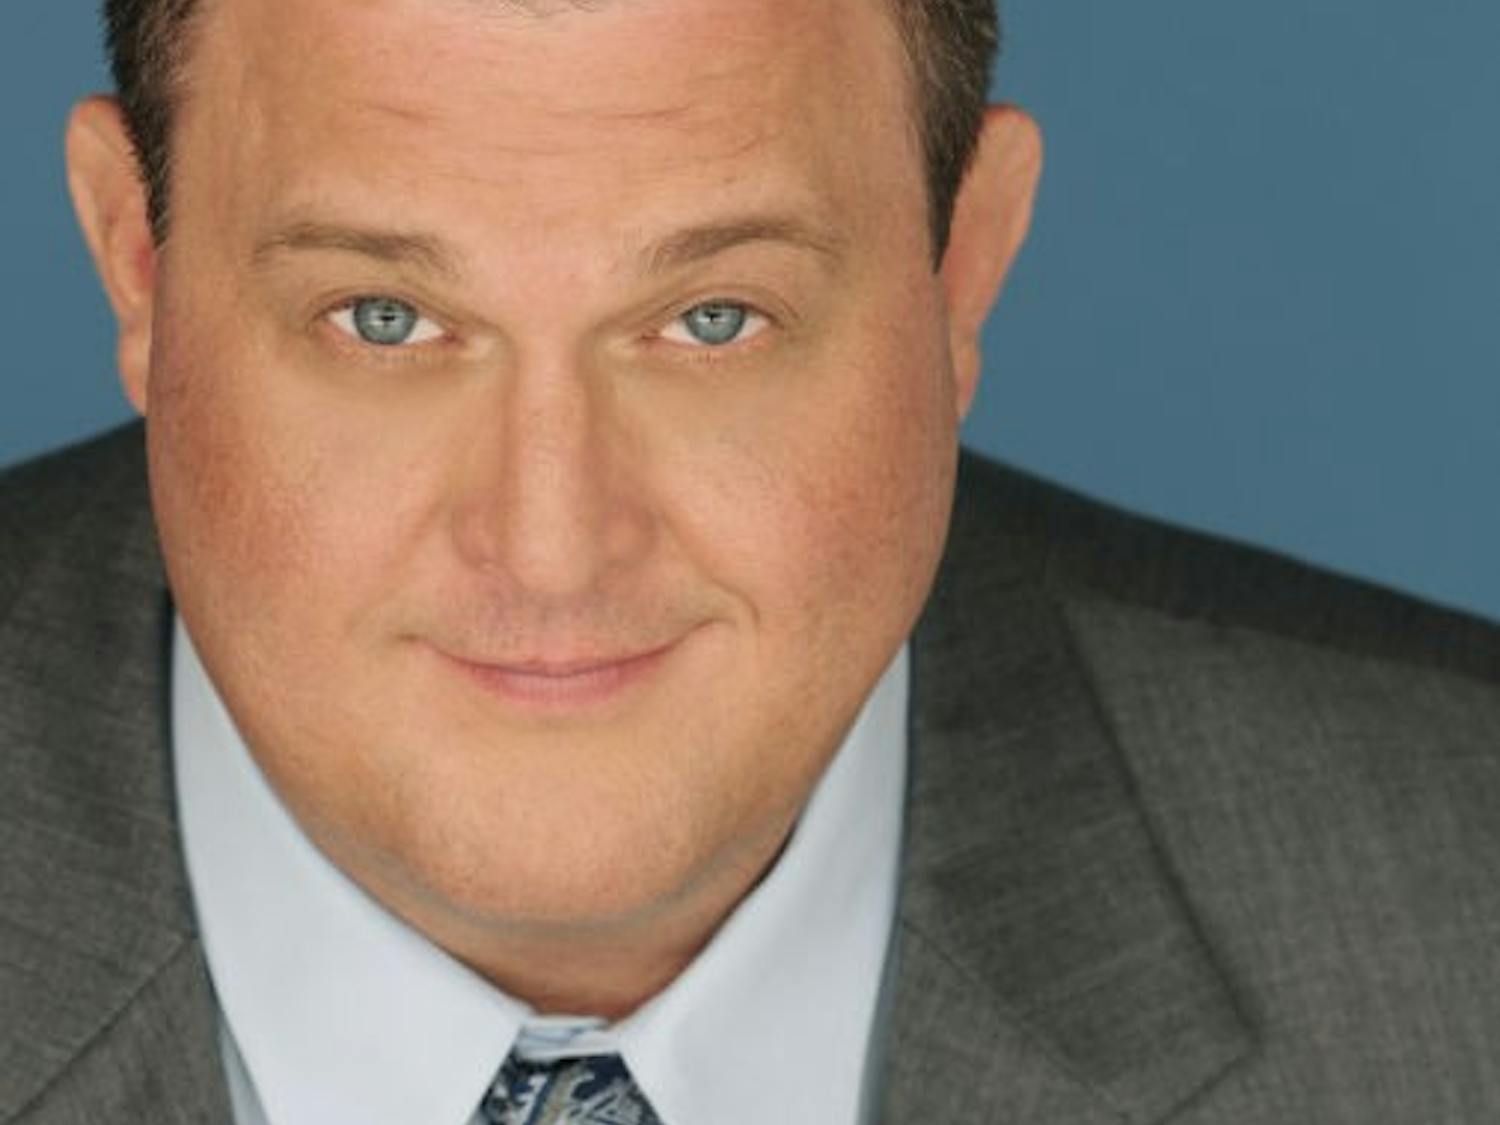 Dads Weekend to feature comedian Billy Gardell  